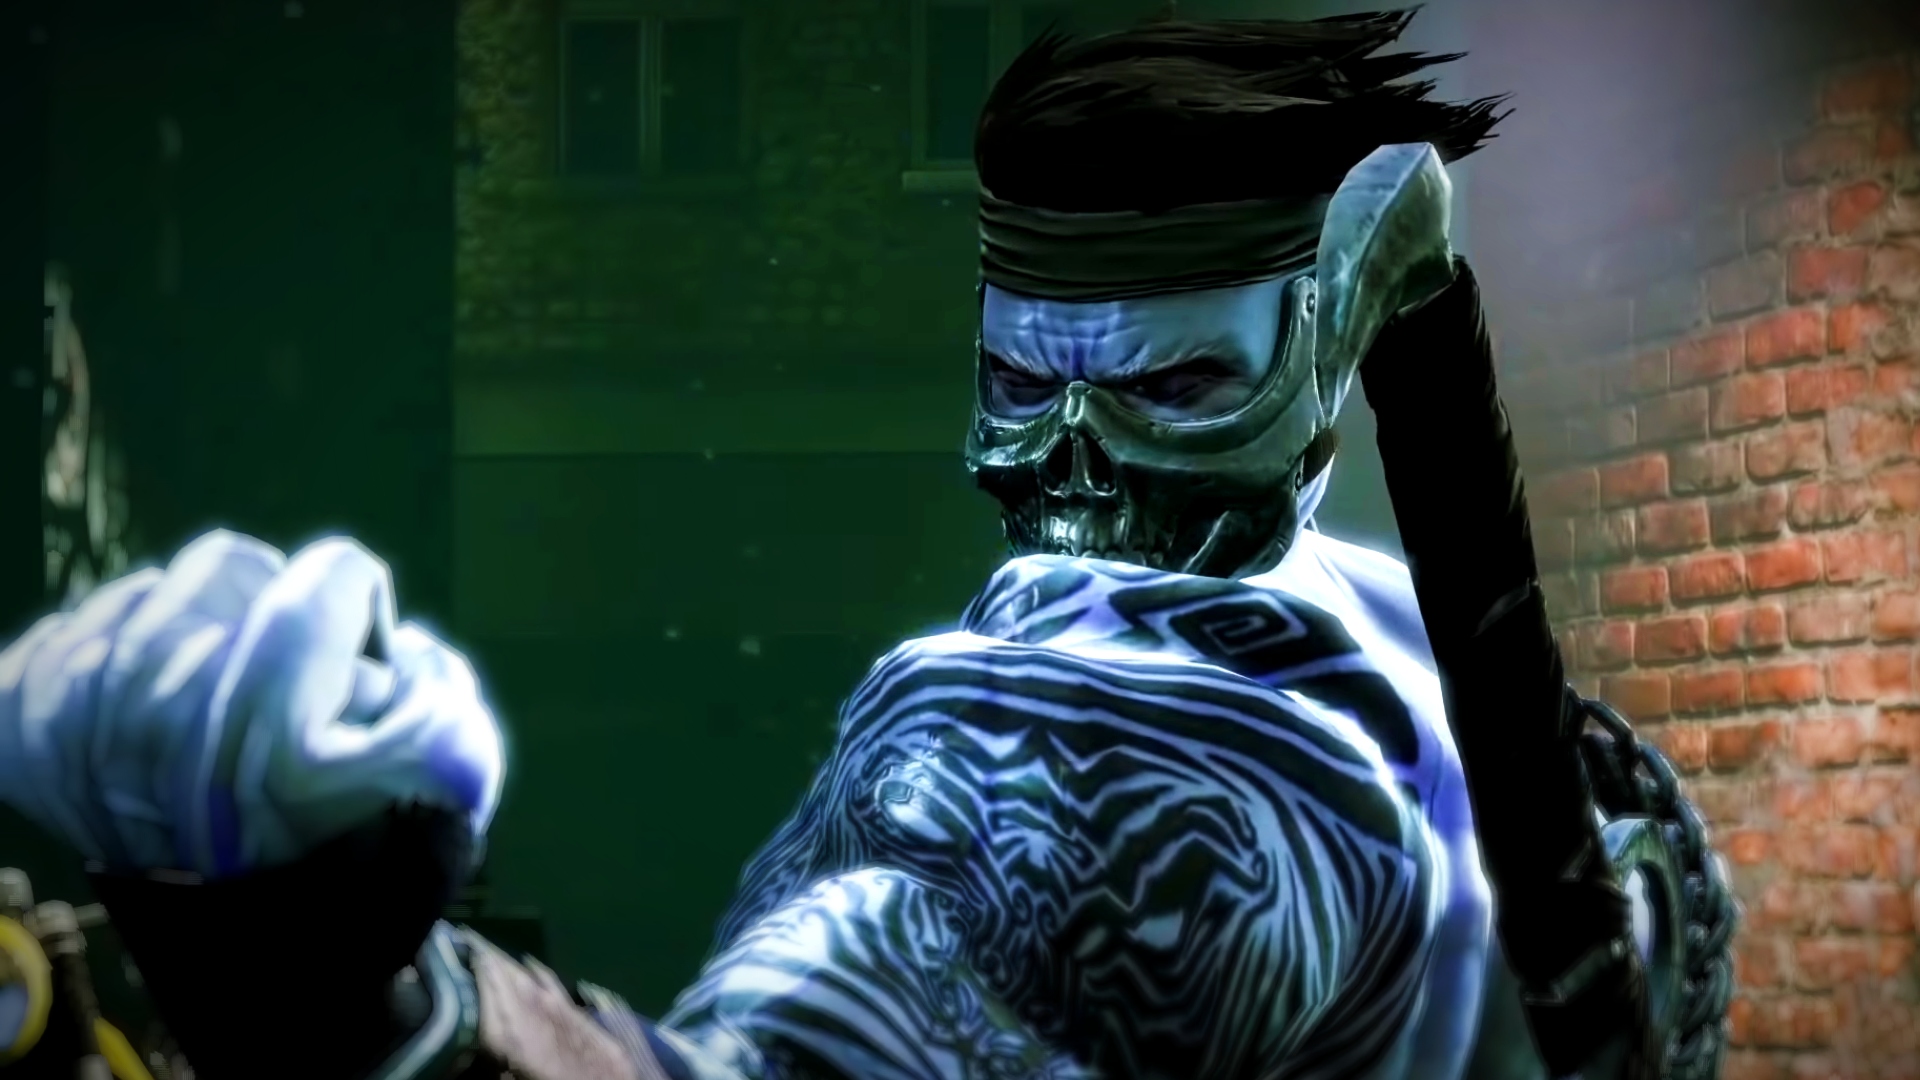 Killer Instinct: Anniversary Edition launches as base game goes free-to-play